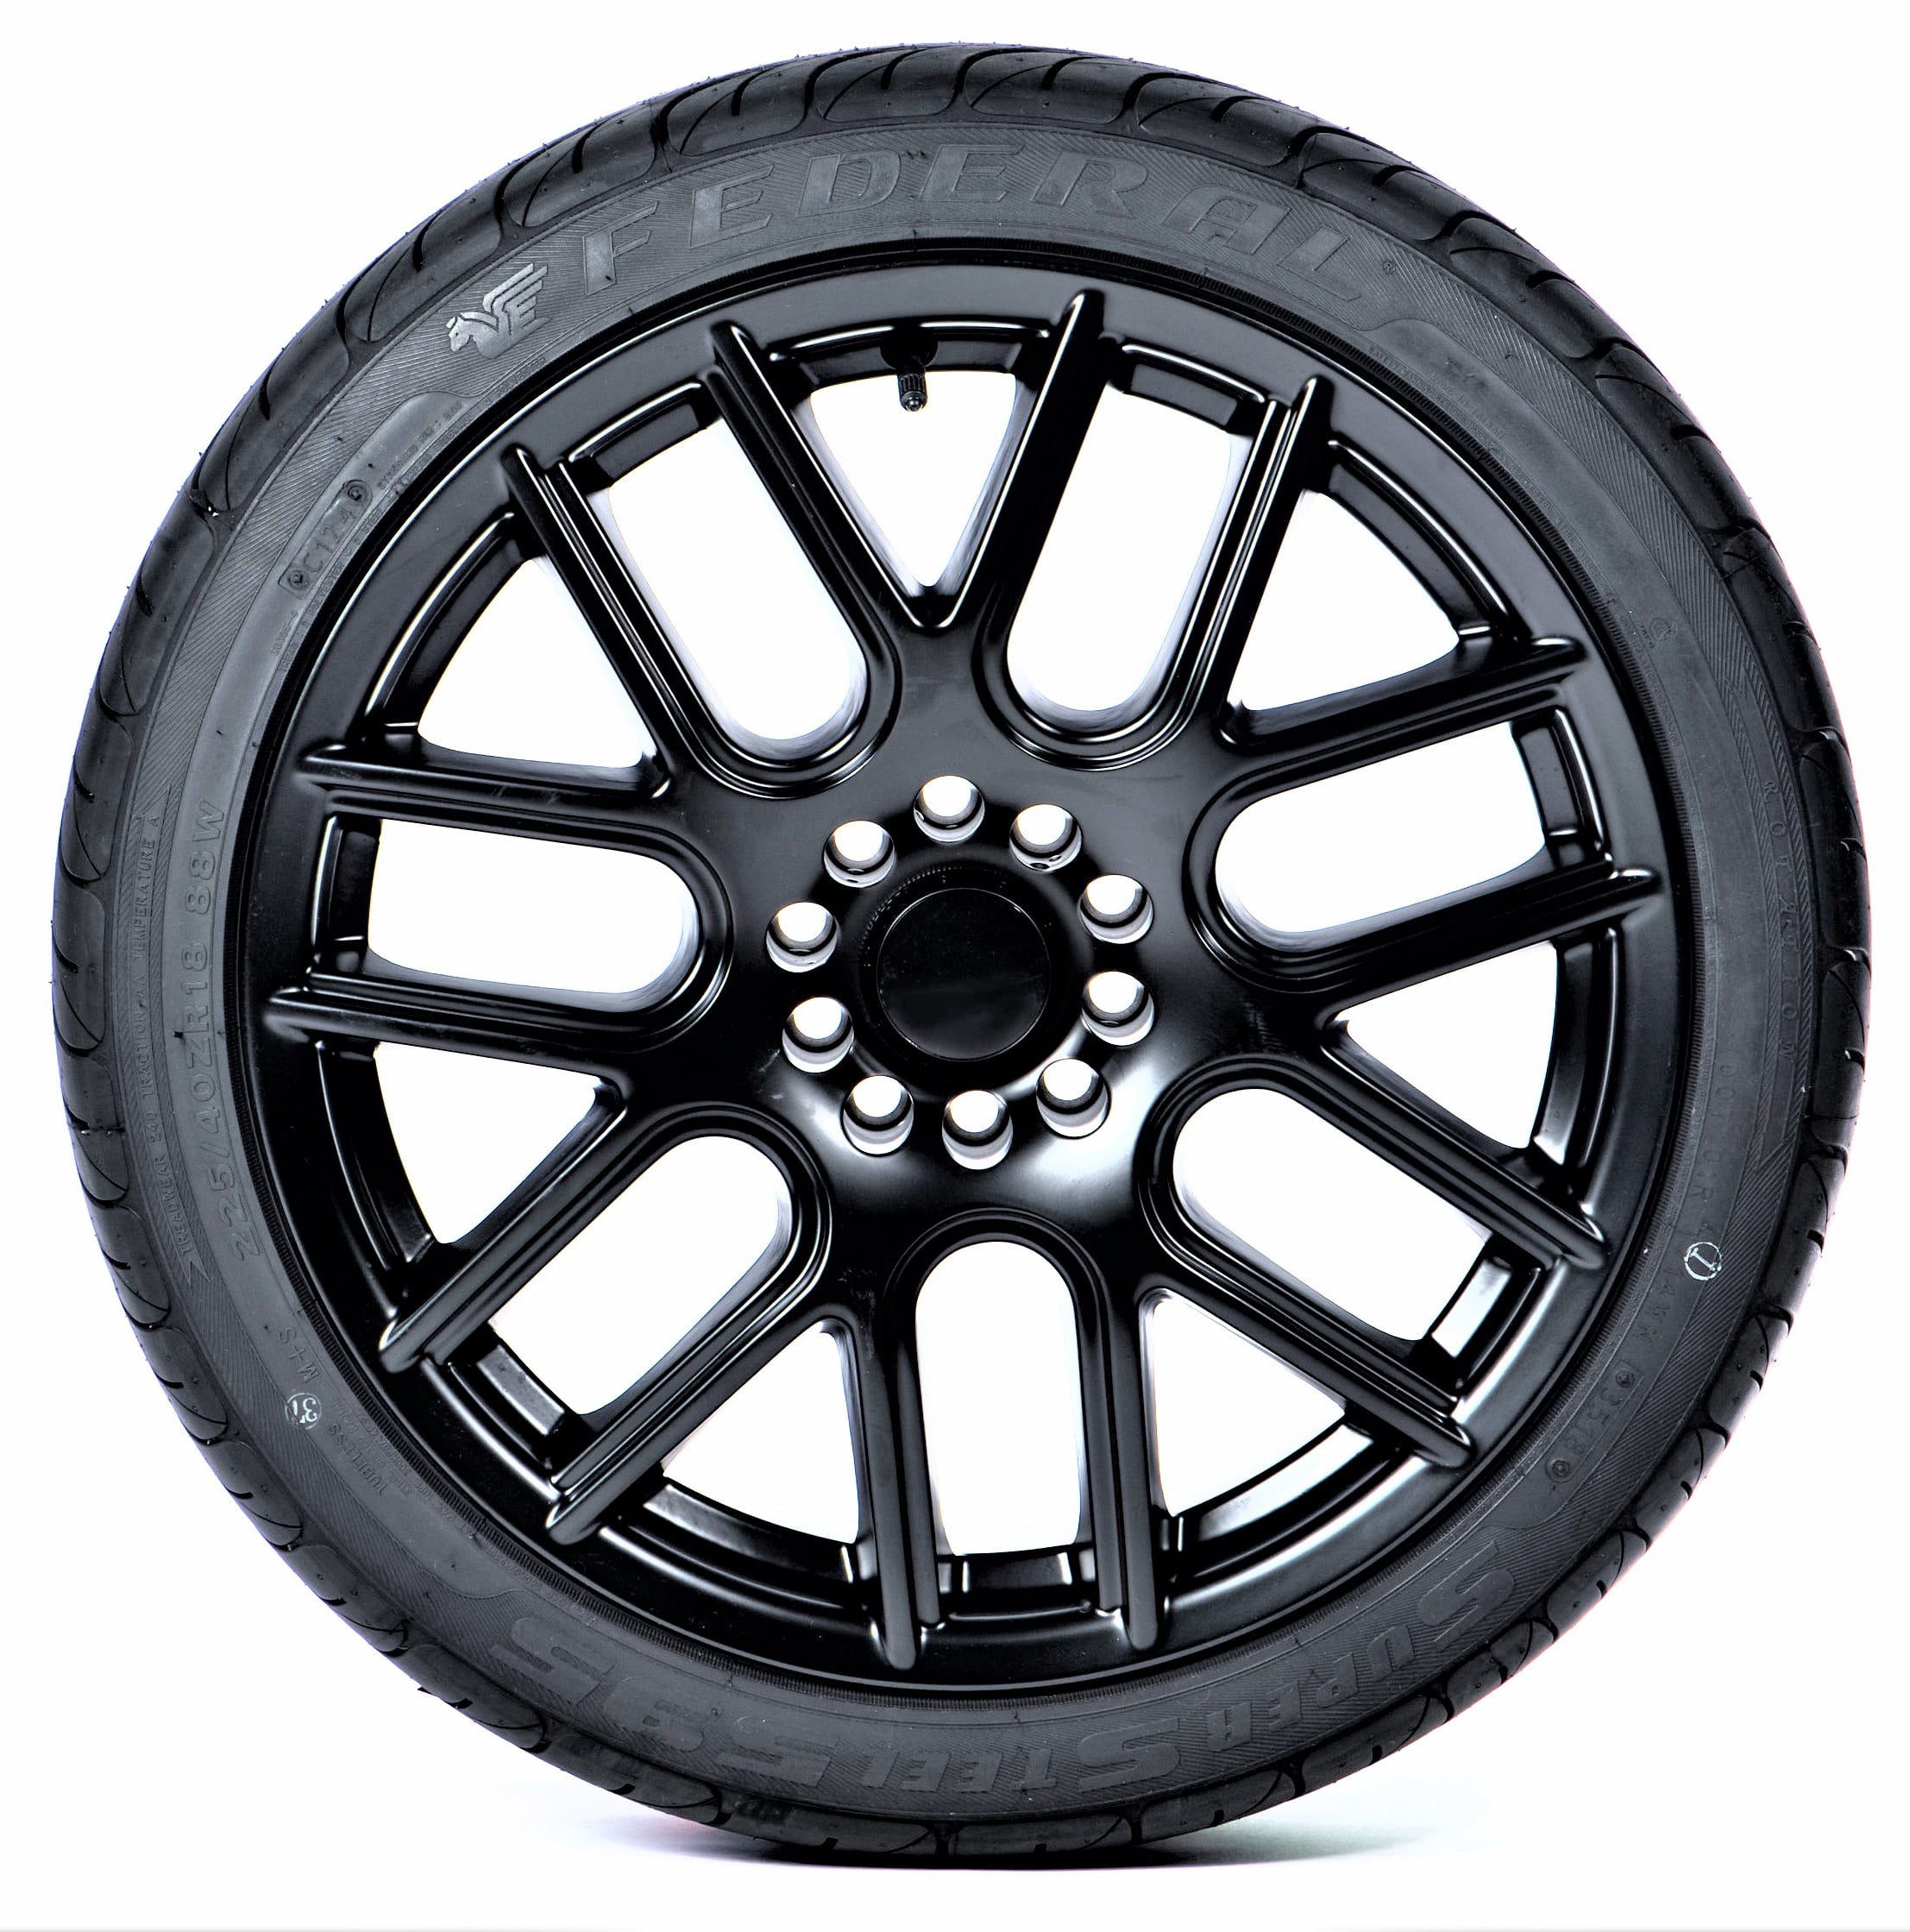 Federal SS595 Performance Tire - 225/35R19 84W